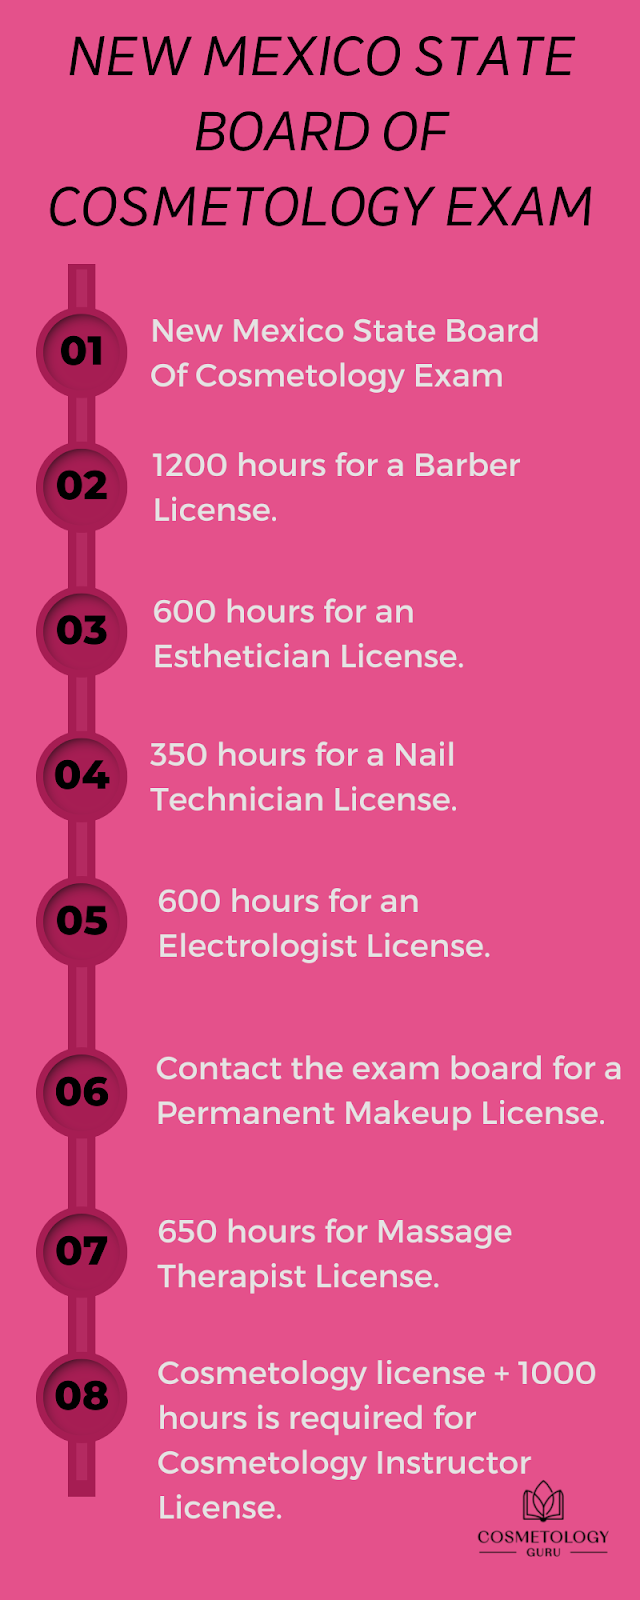 New Mexico State Board of Cosmetology Exam